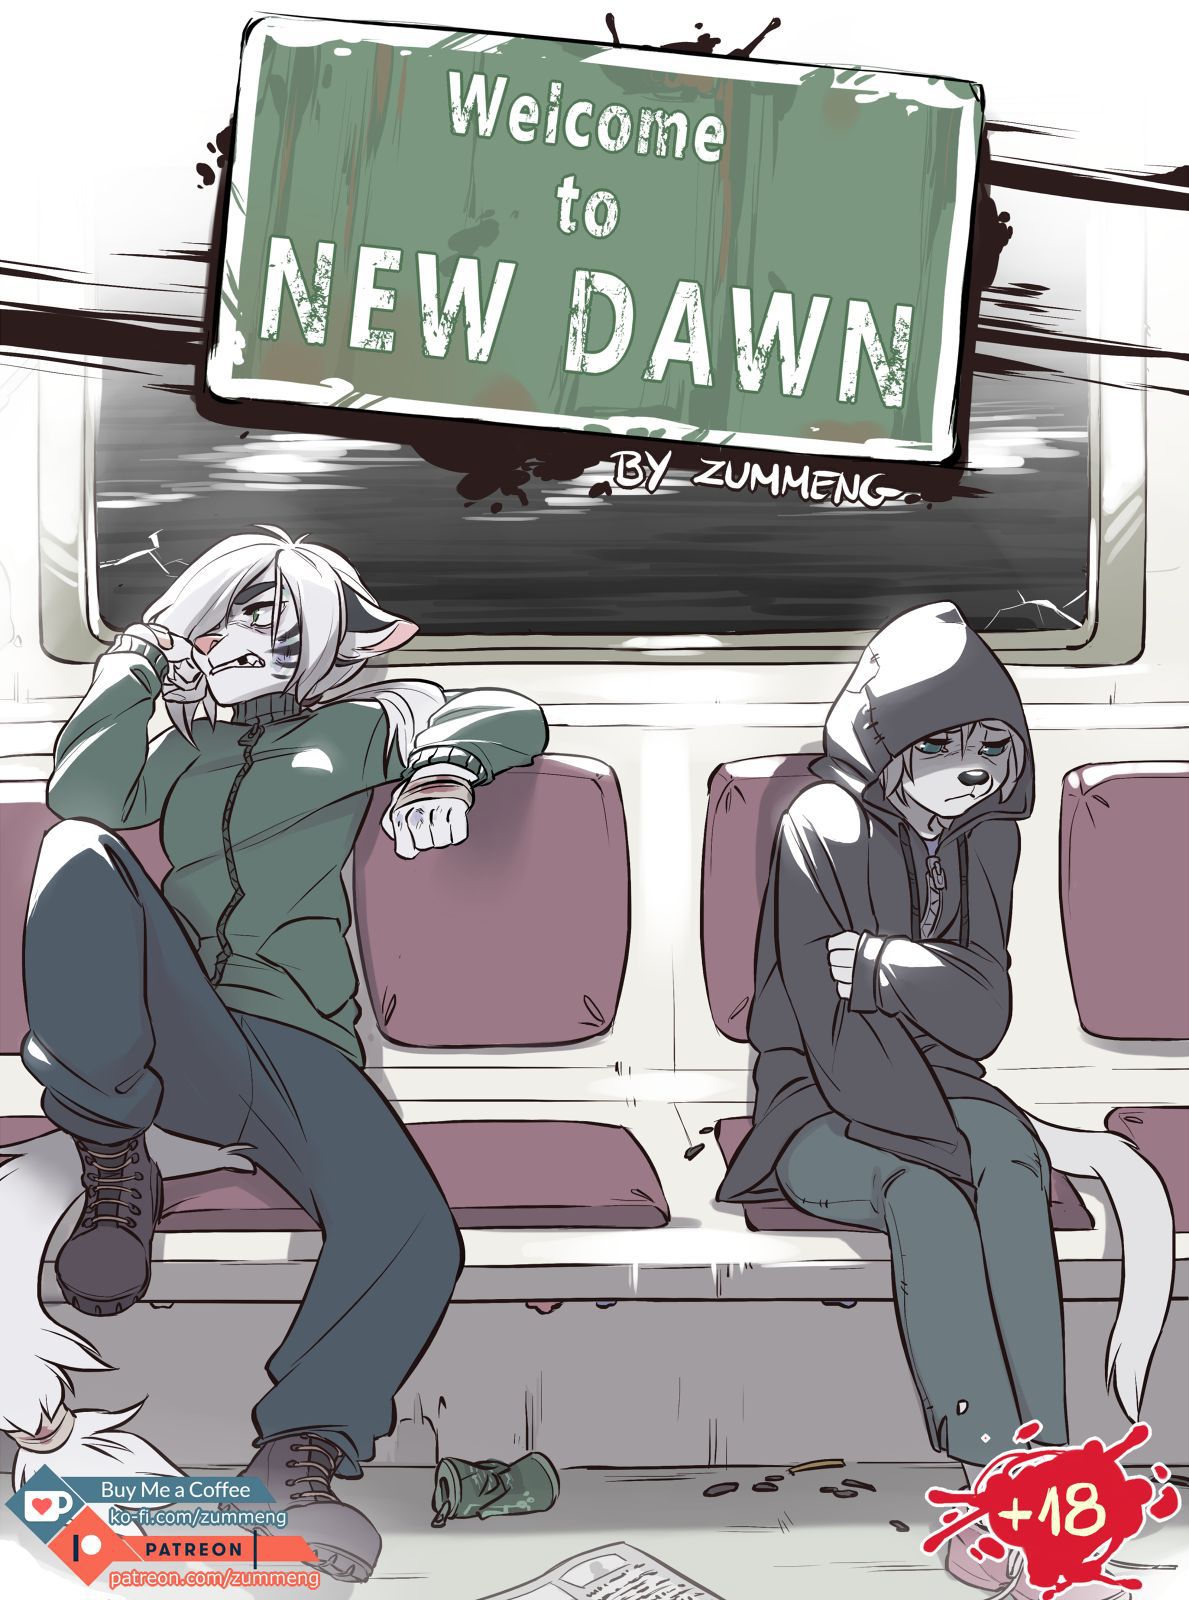 [Zummeng] Welcome to New Dawn [Ongoing] 1